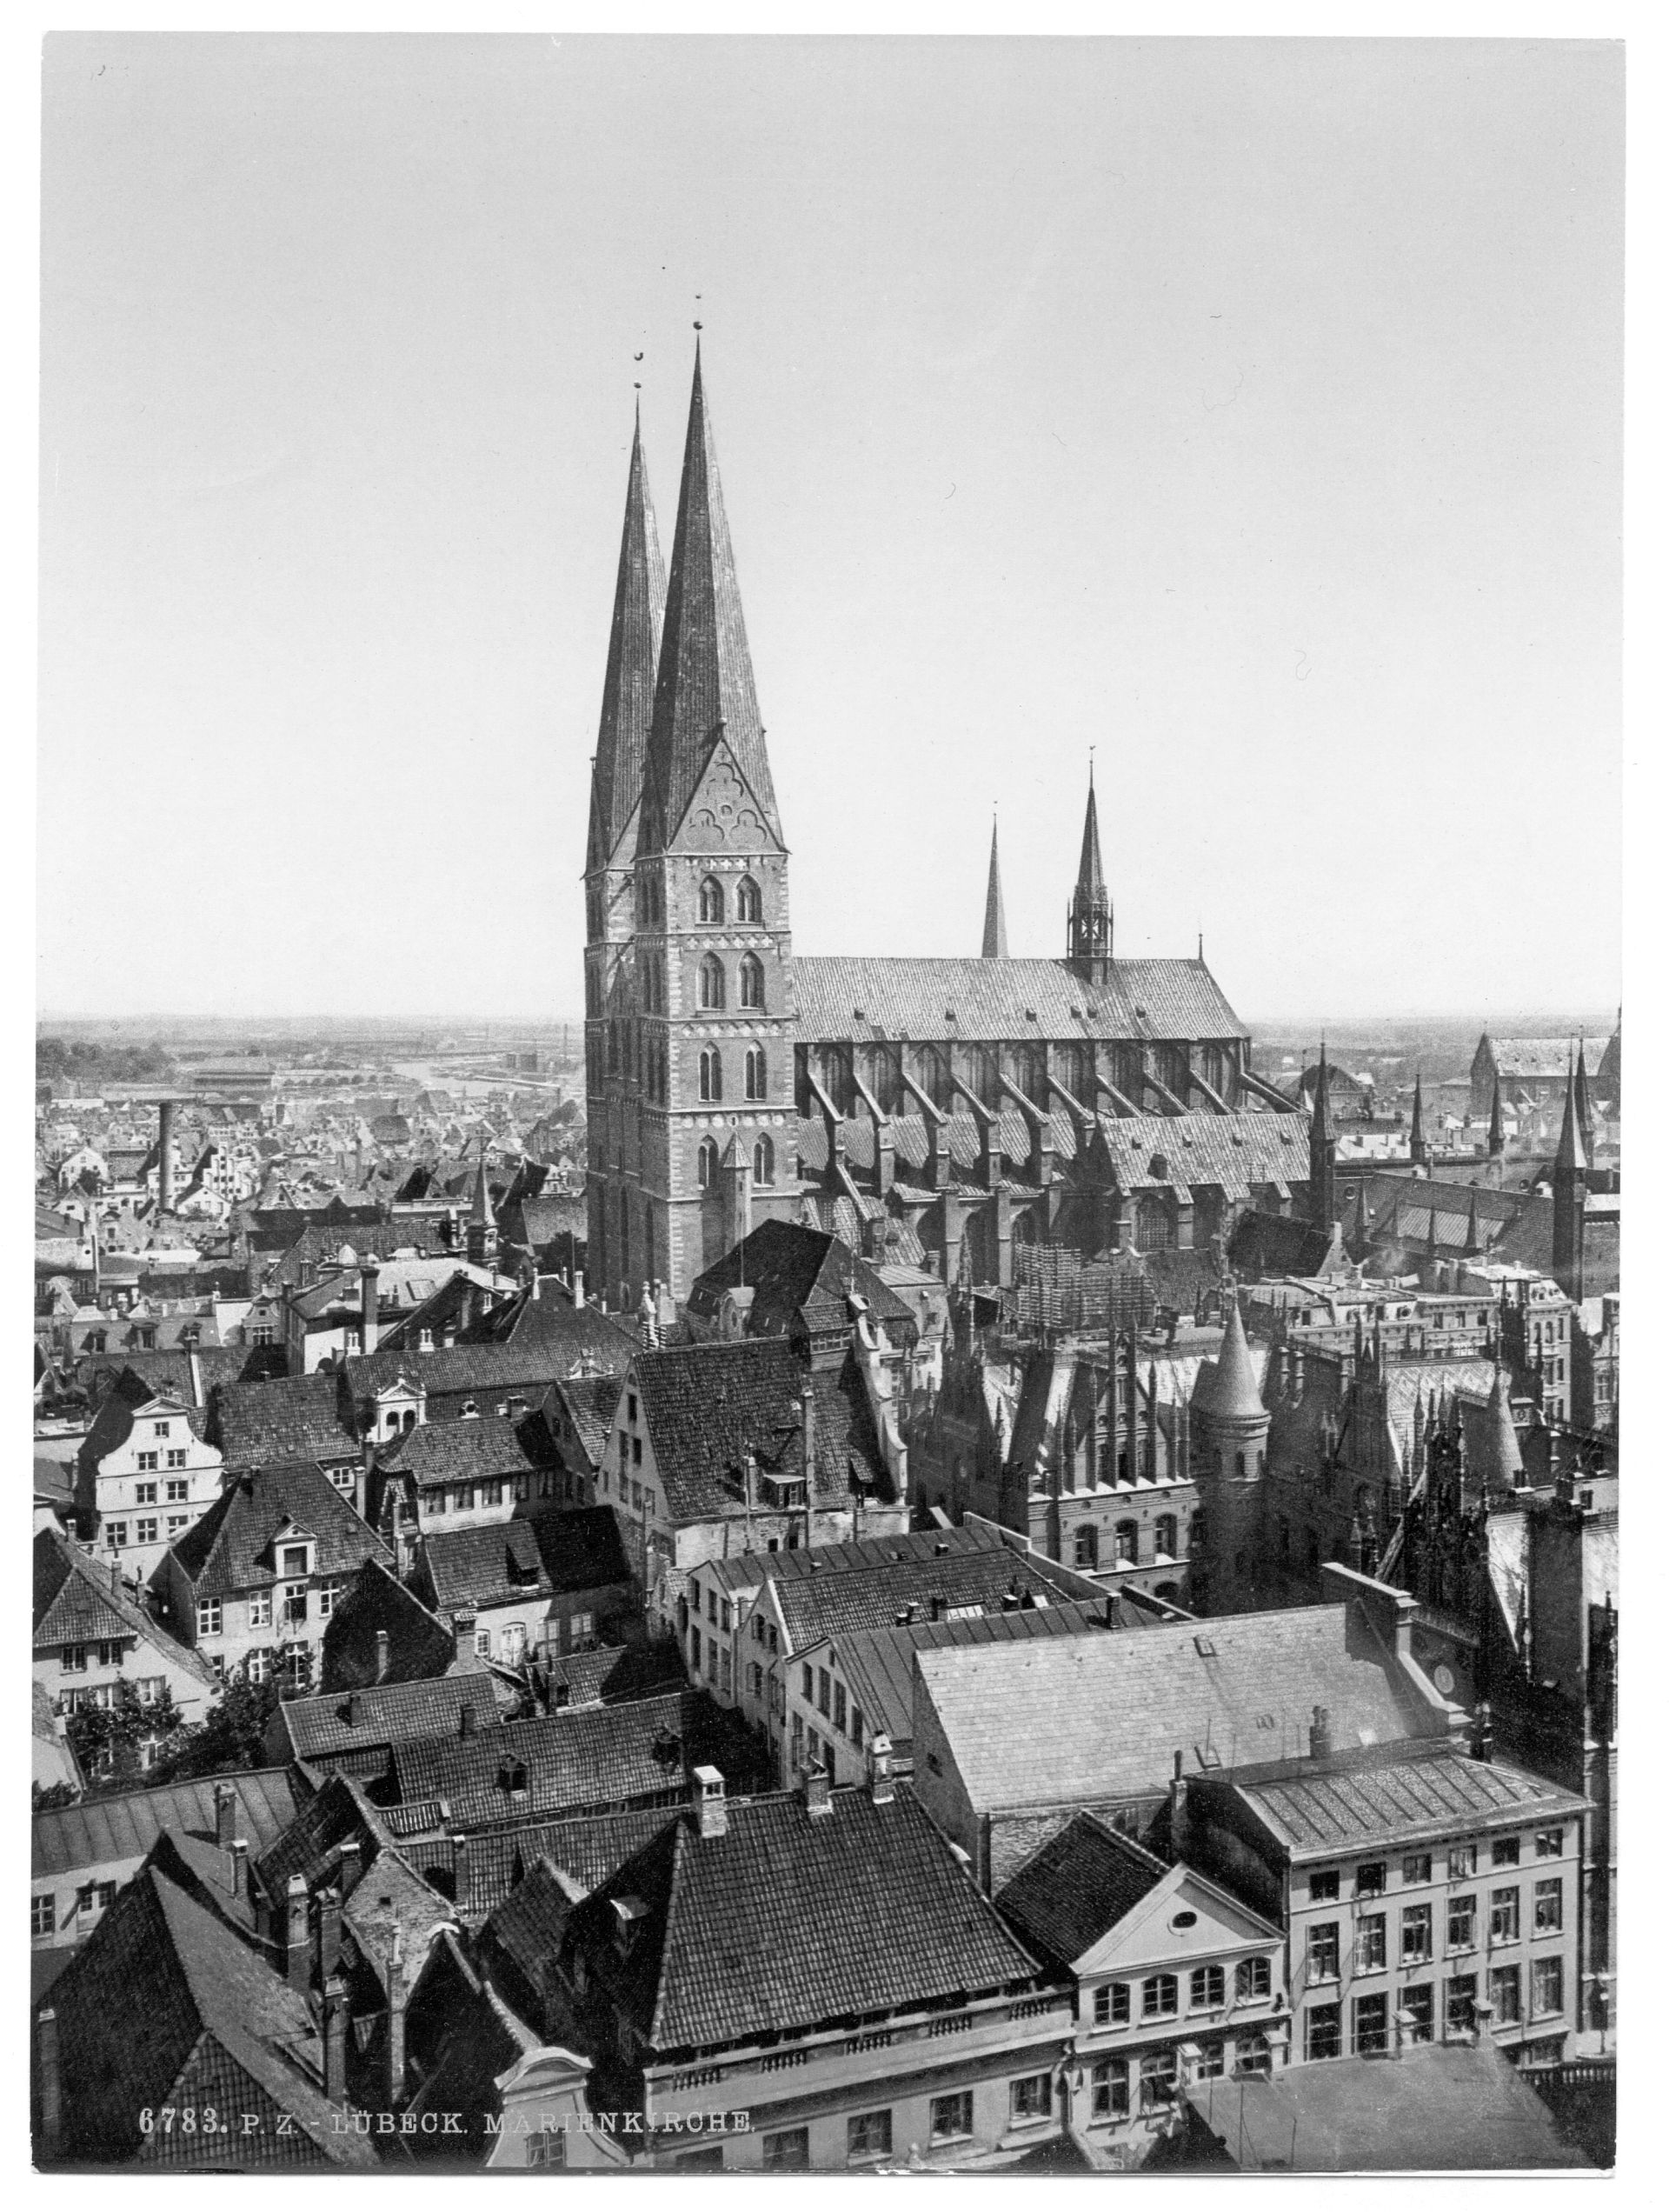 St. Mary's, from St. Peter's Clock Tower, Lubeck, Germany (1890s)